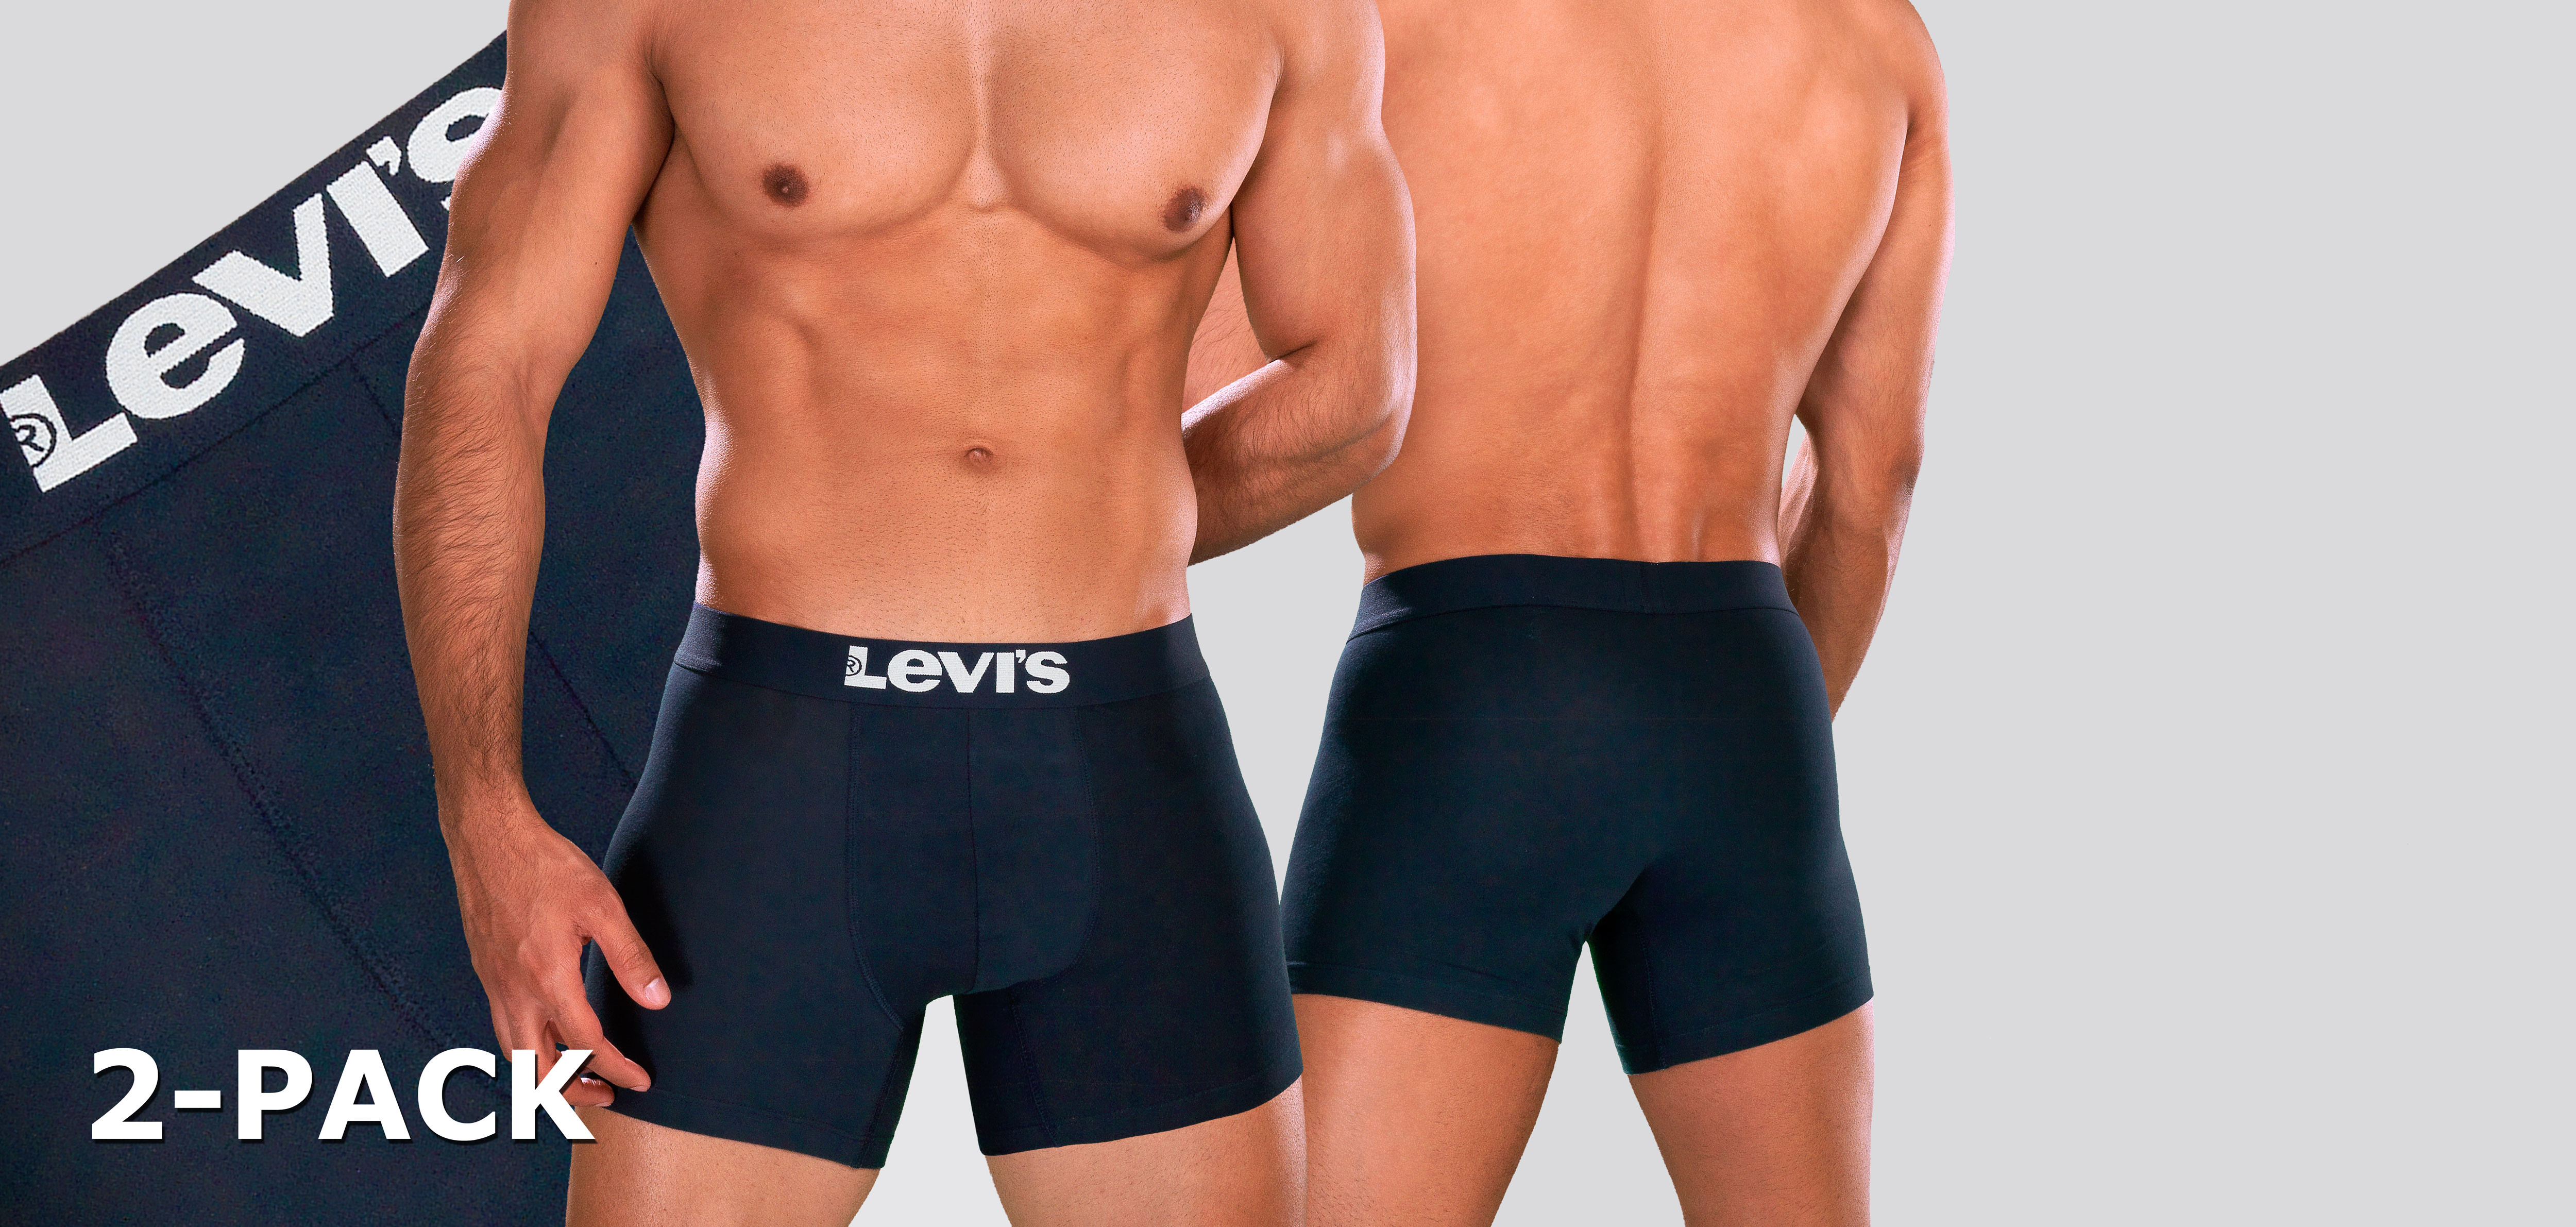 Levi_s Solid Basic Boxer Brief 2-Pack 1001, color Nee